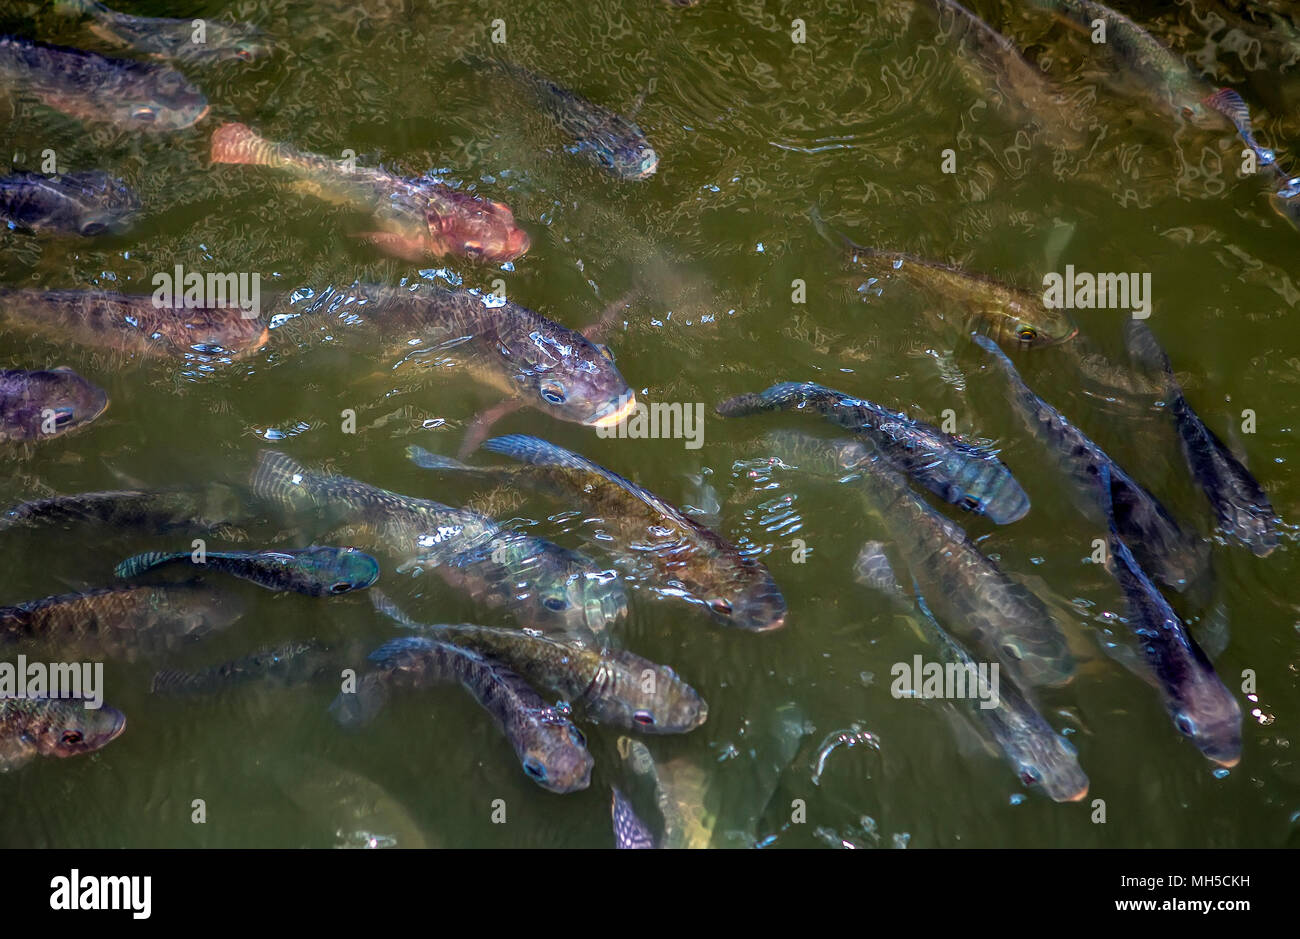 A school of hungry Tilapia swim in an aquaculture pool at an aquaculture farm in Narra, Palawan Island in the Philippines. Stock Photo